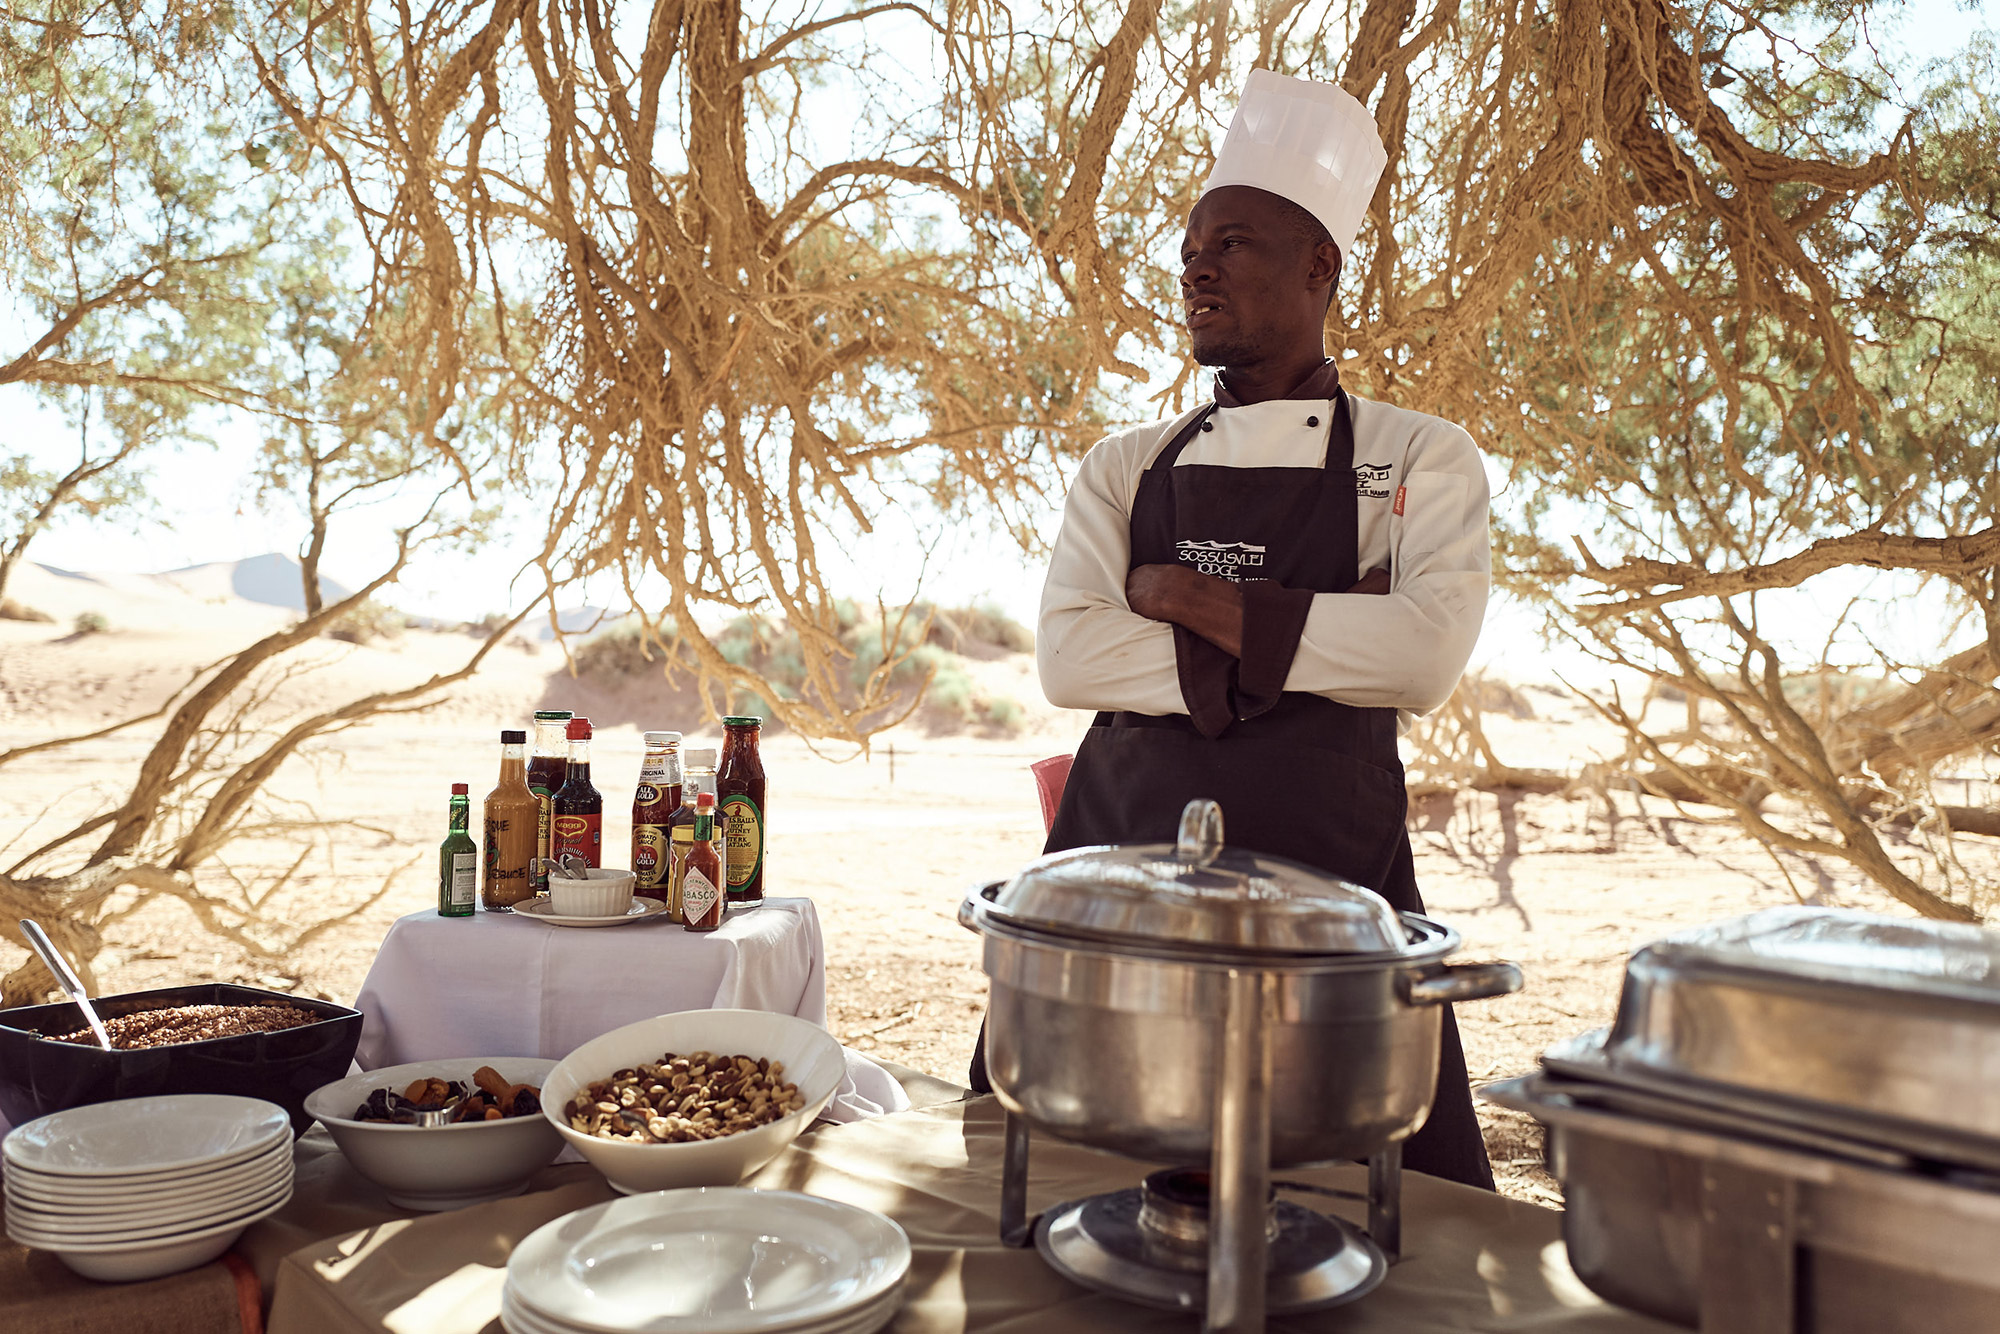 Chef at the breakfast buffet in the desert